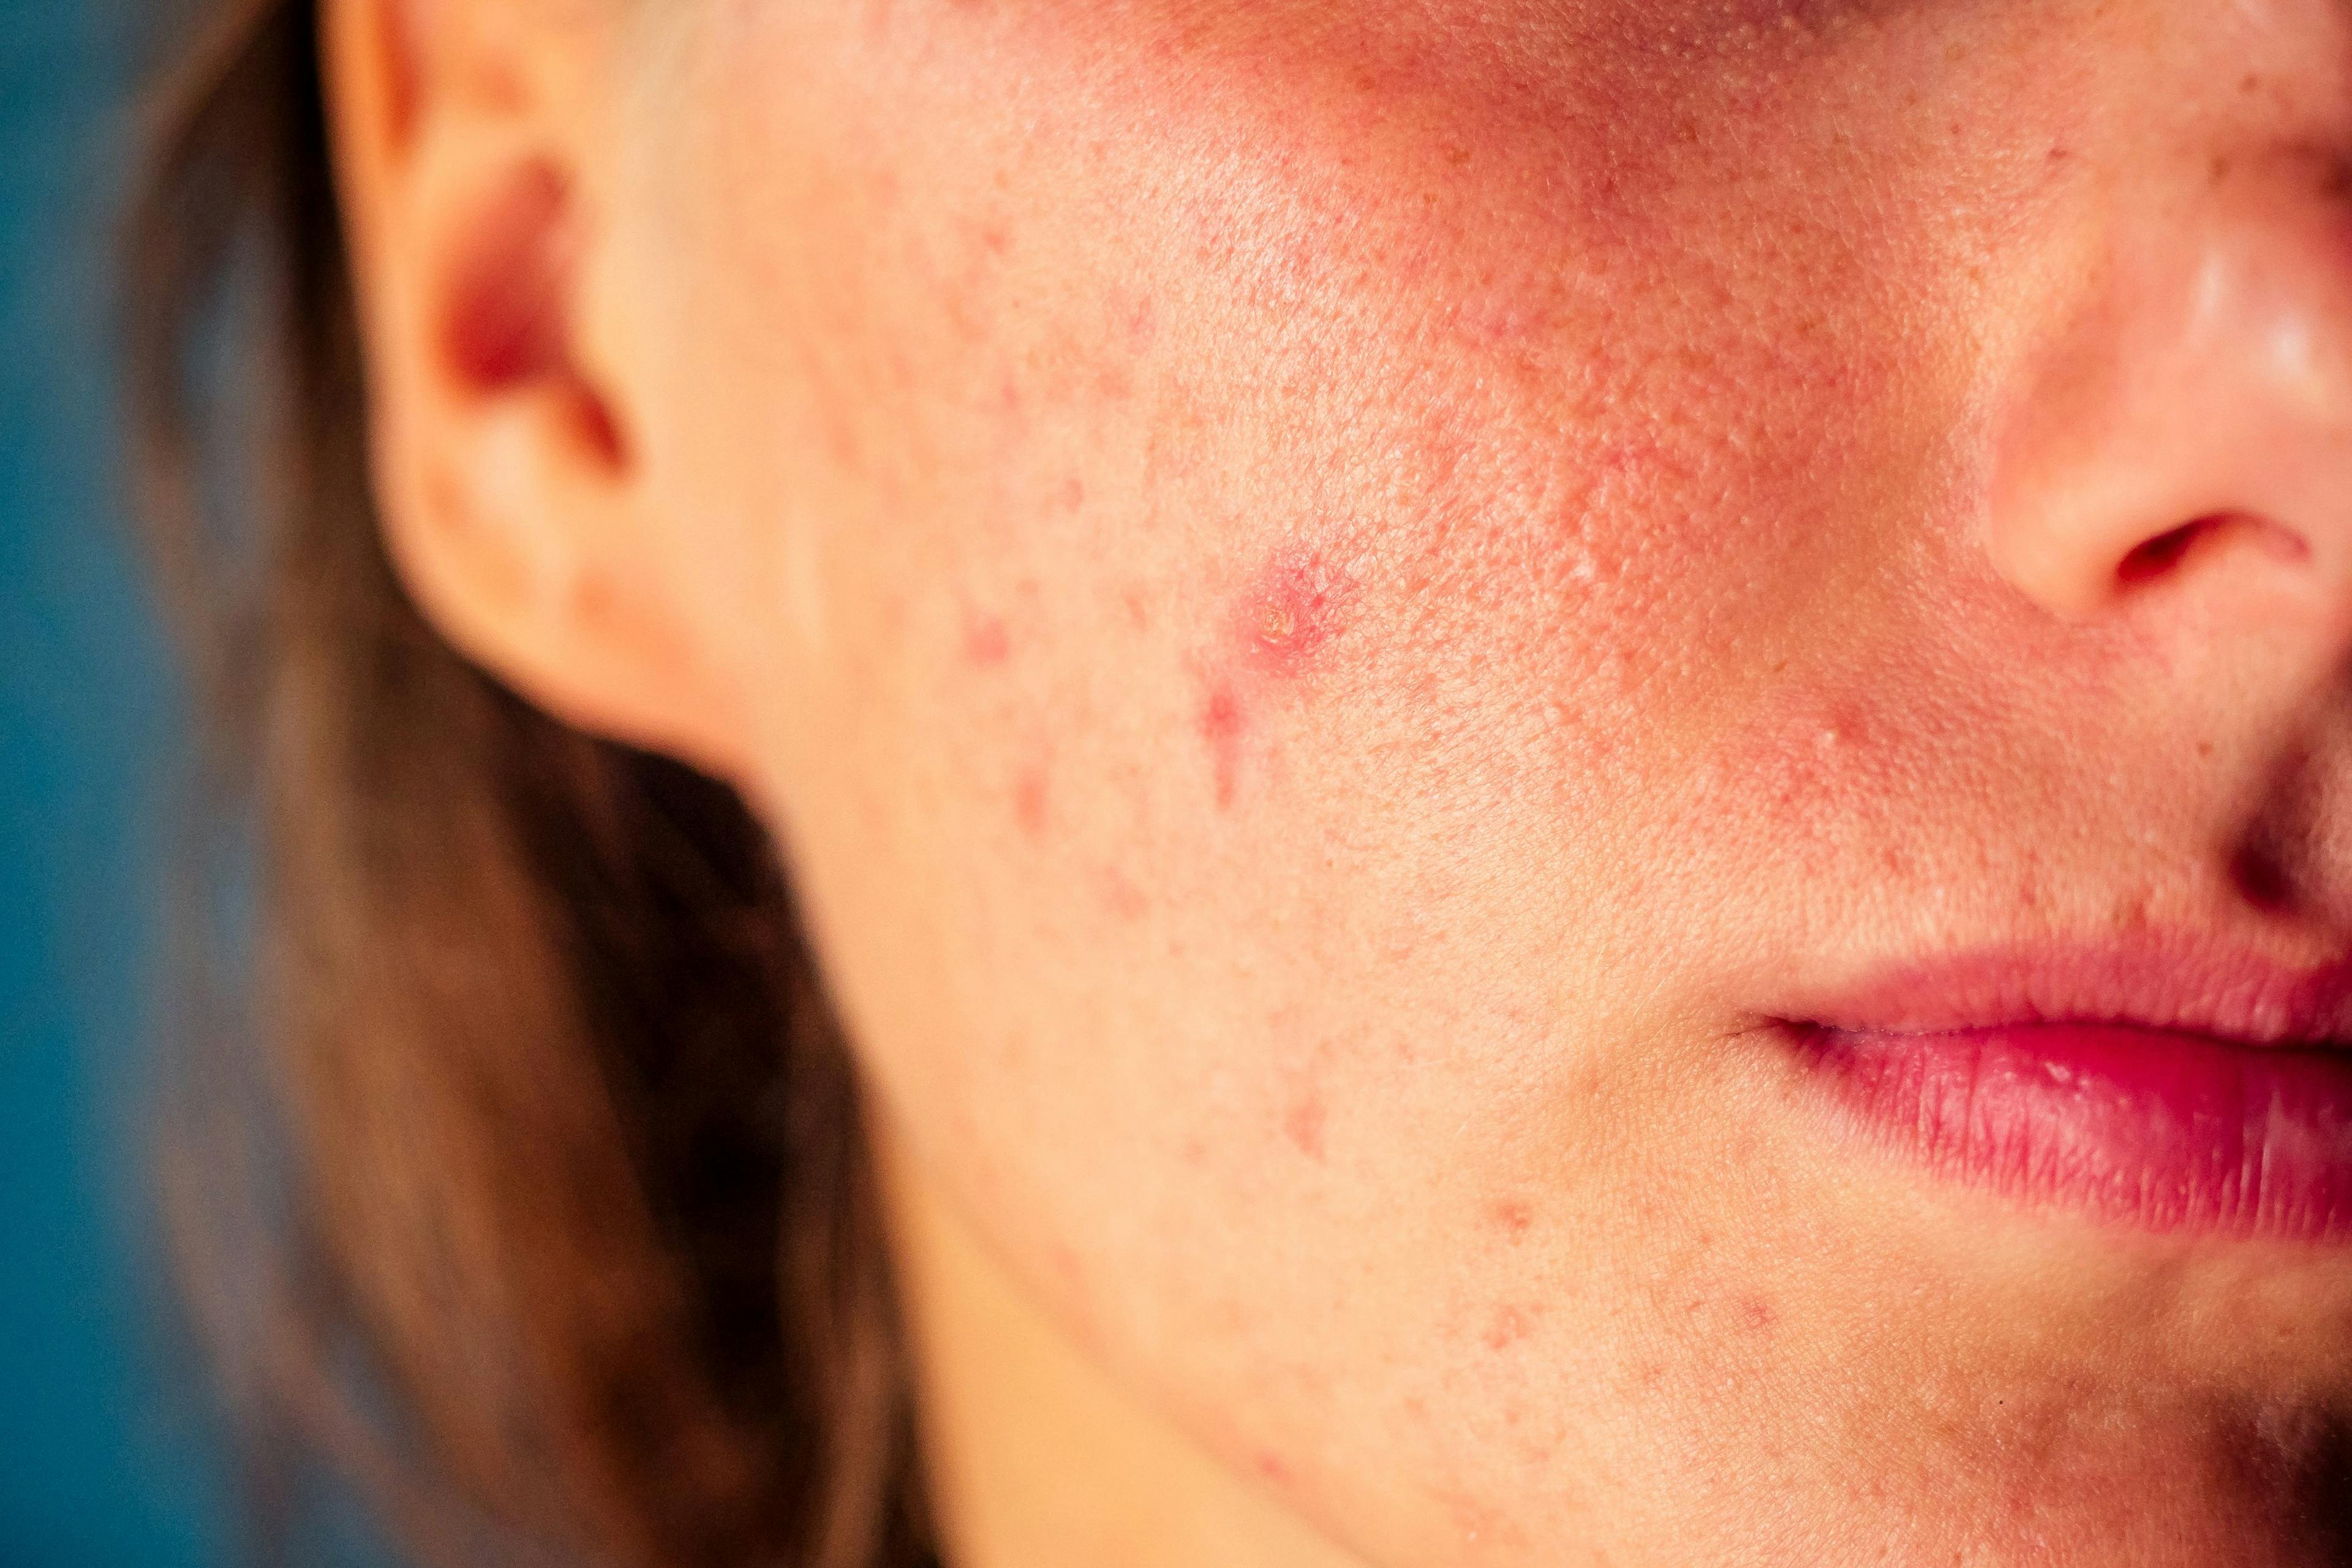 Add-on statins effective in acne